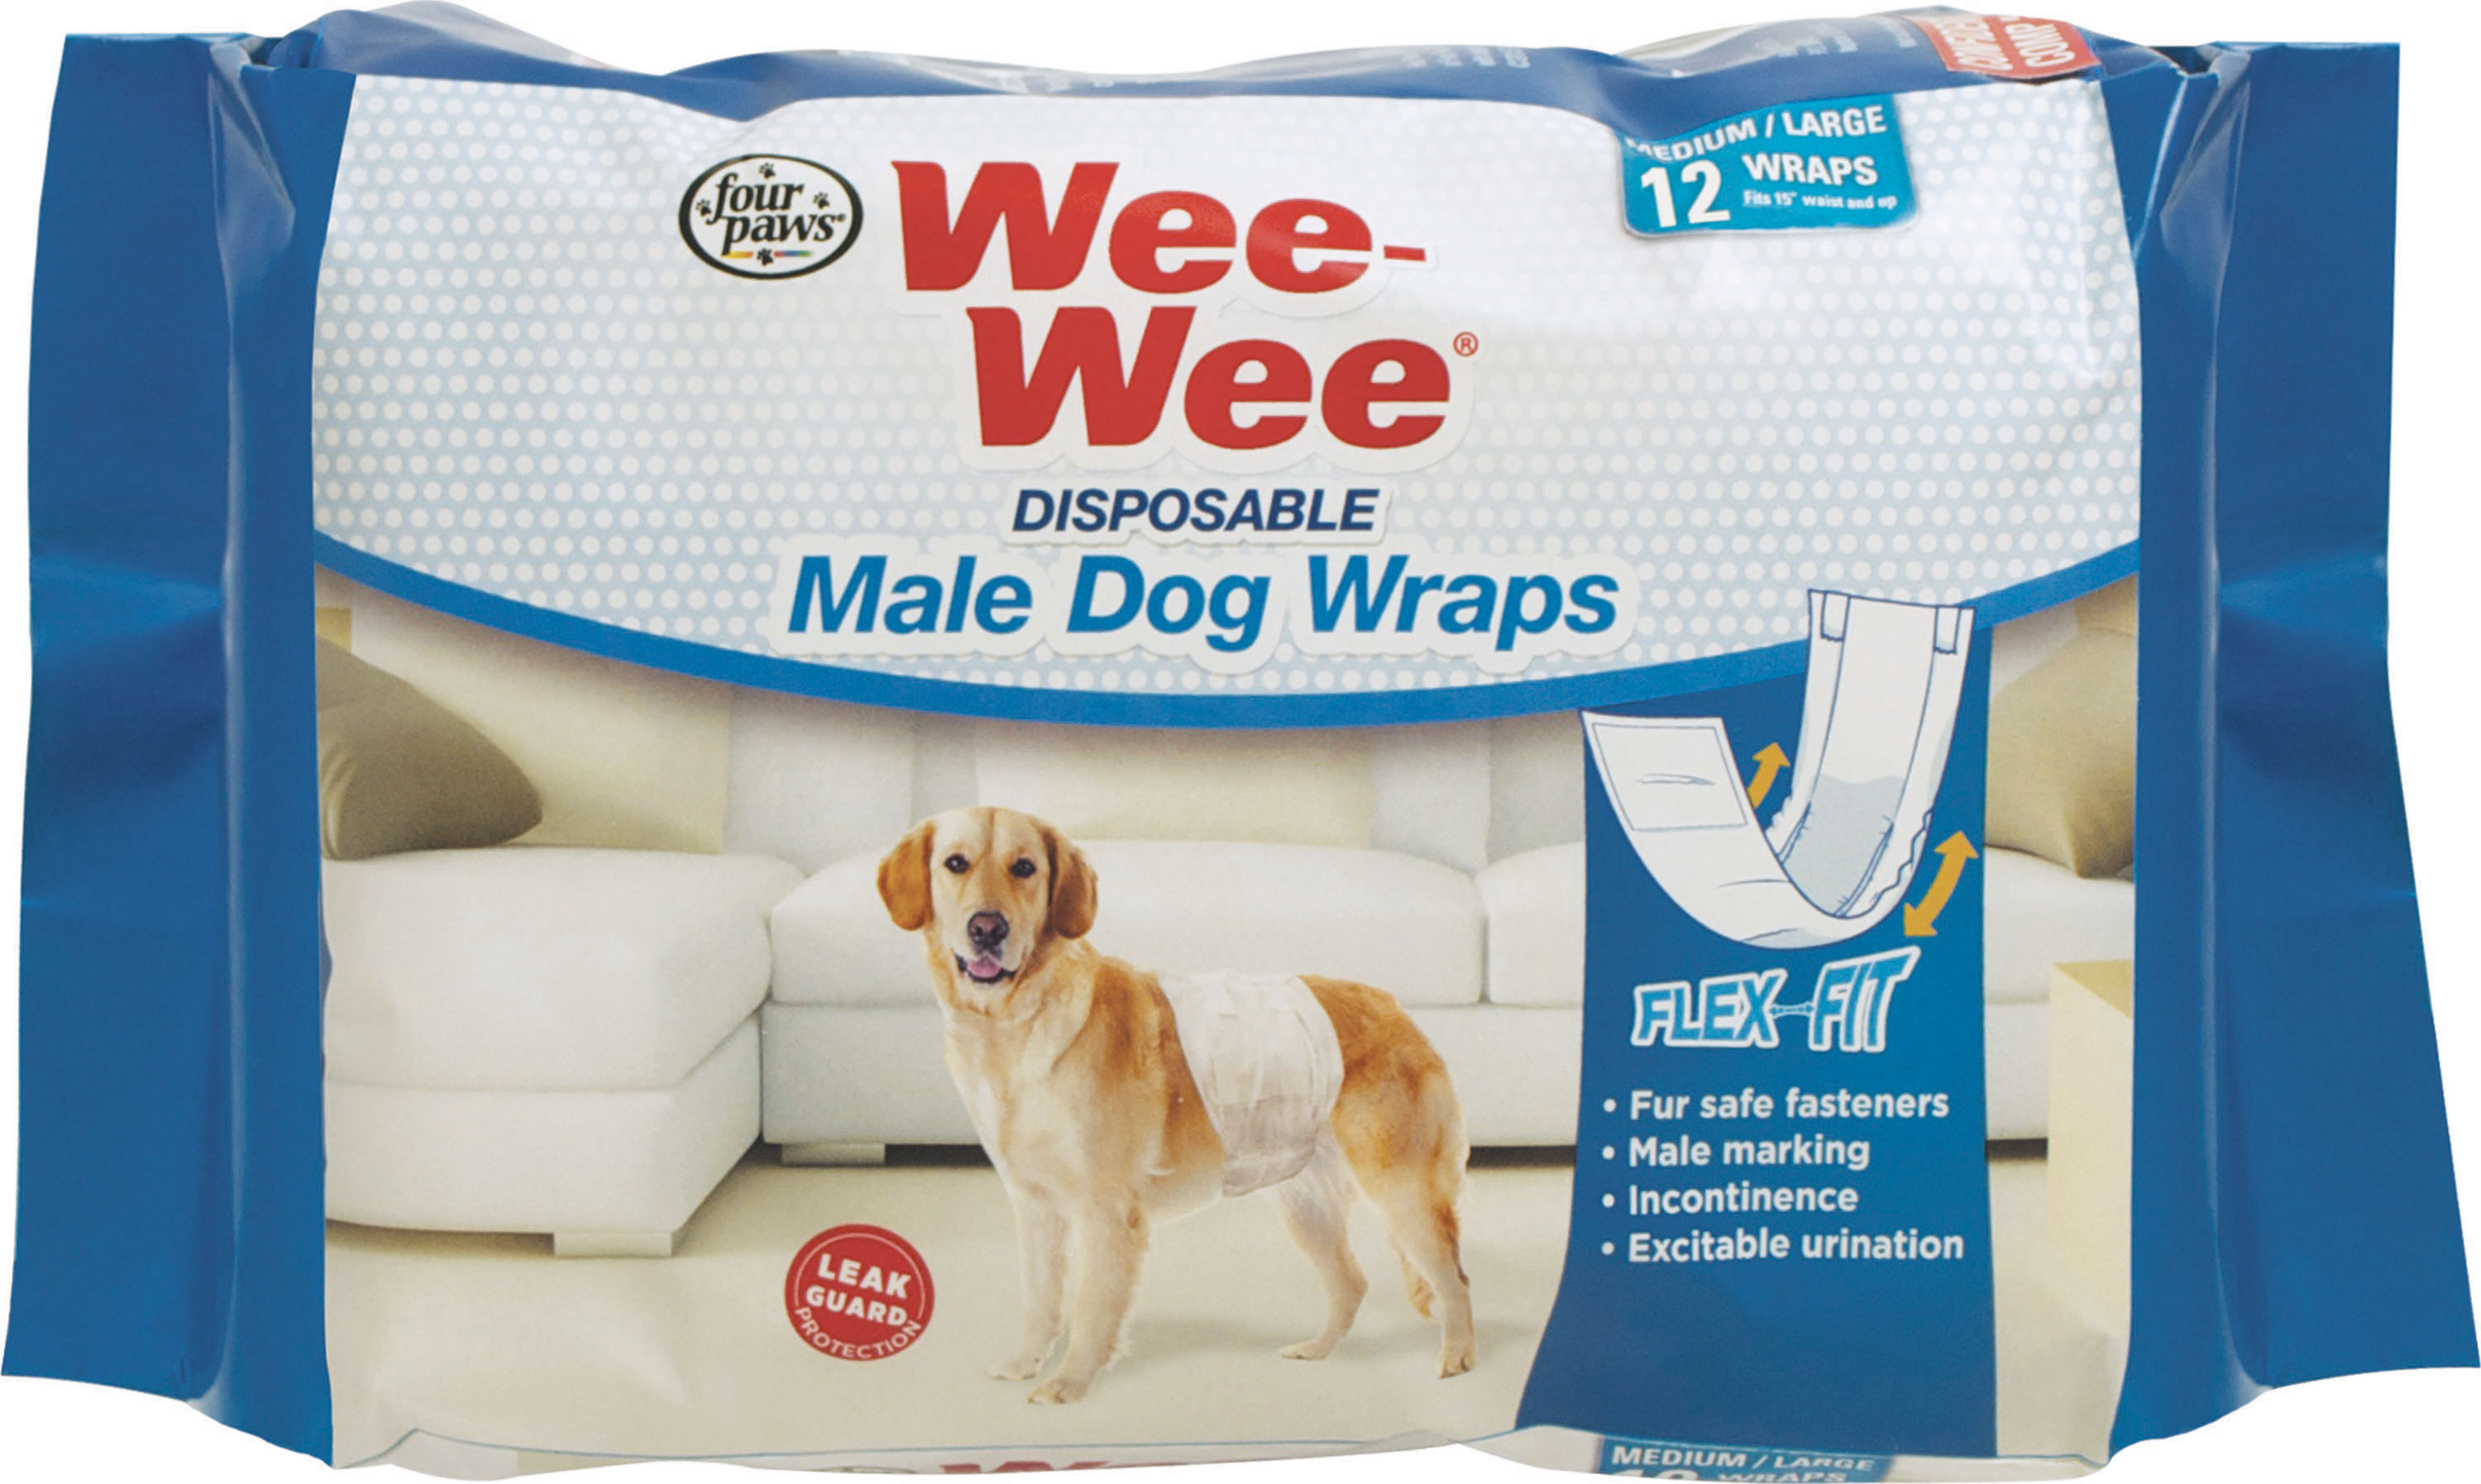 Wee-wee Disposable Male Wraps (Option 1: Med/lrg/12ct)